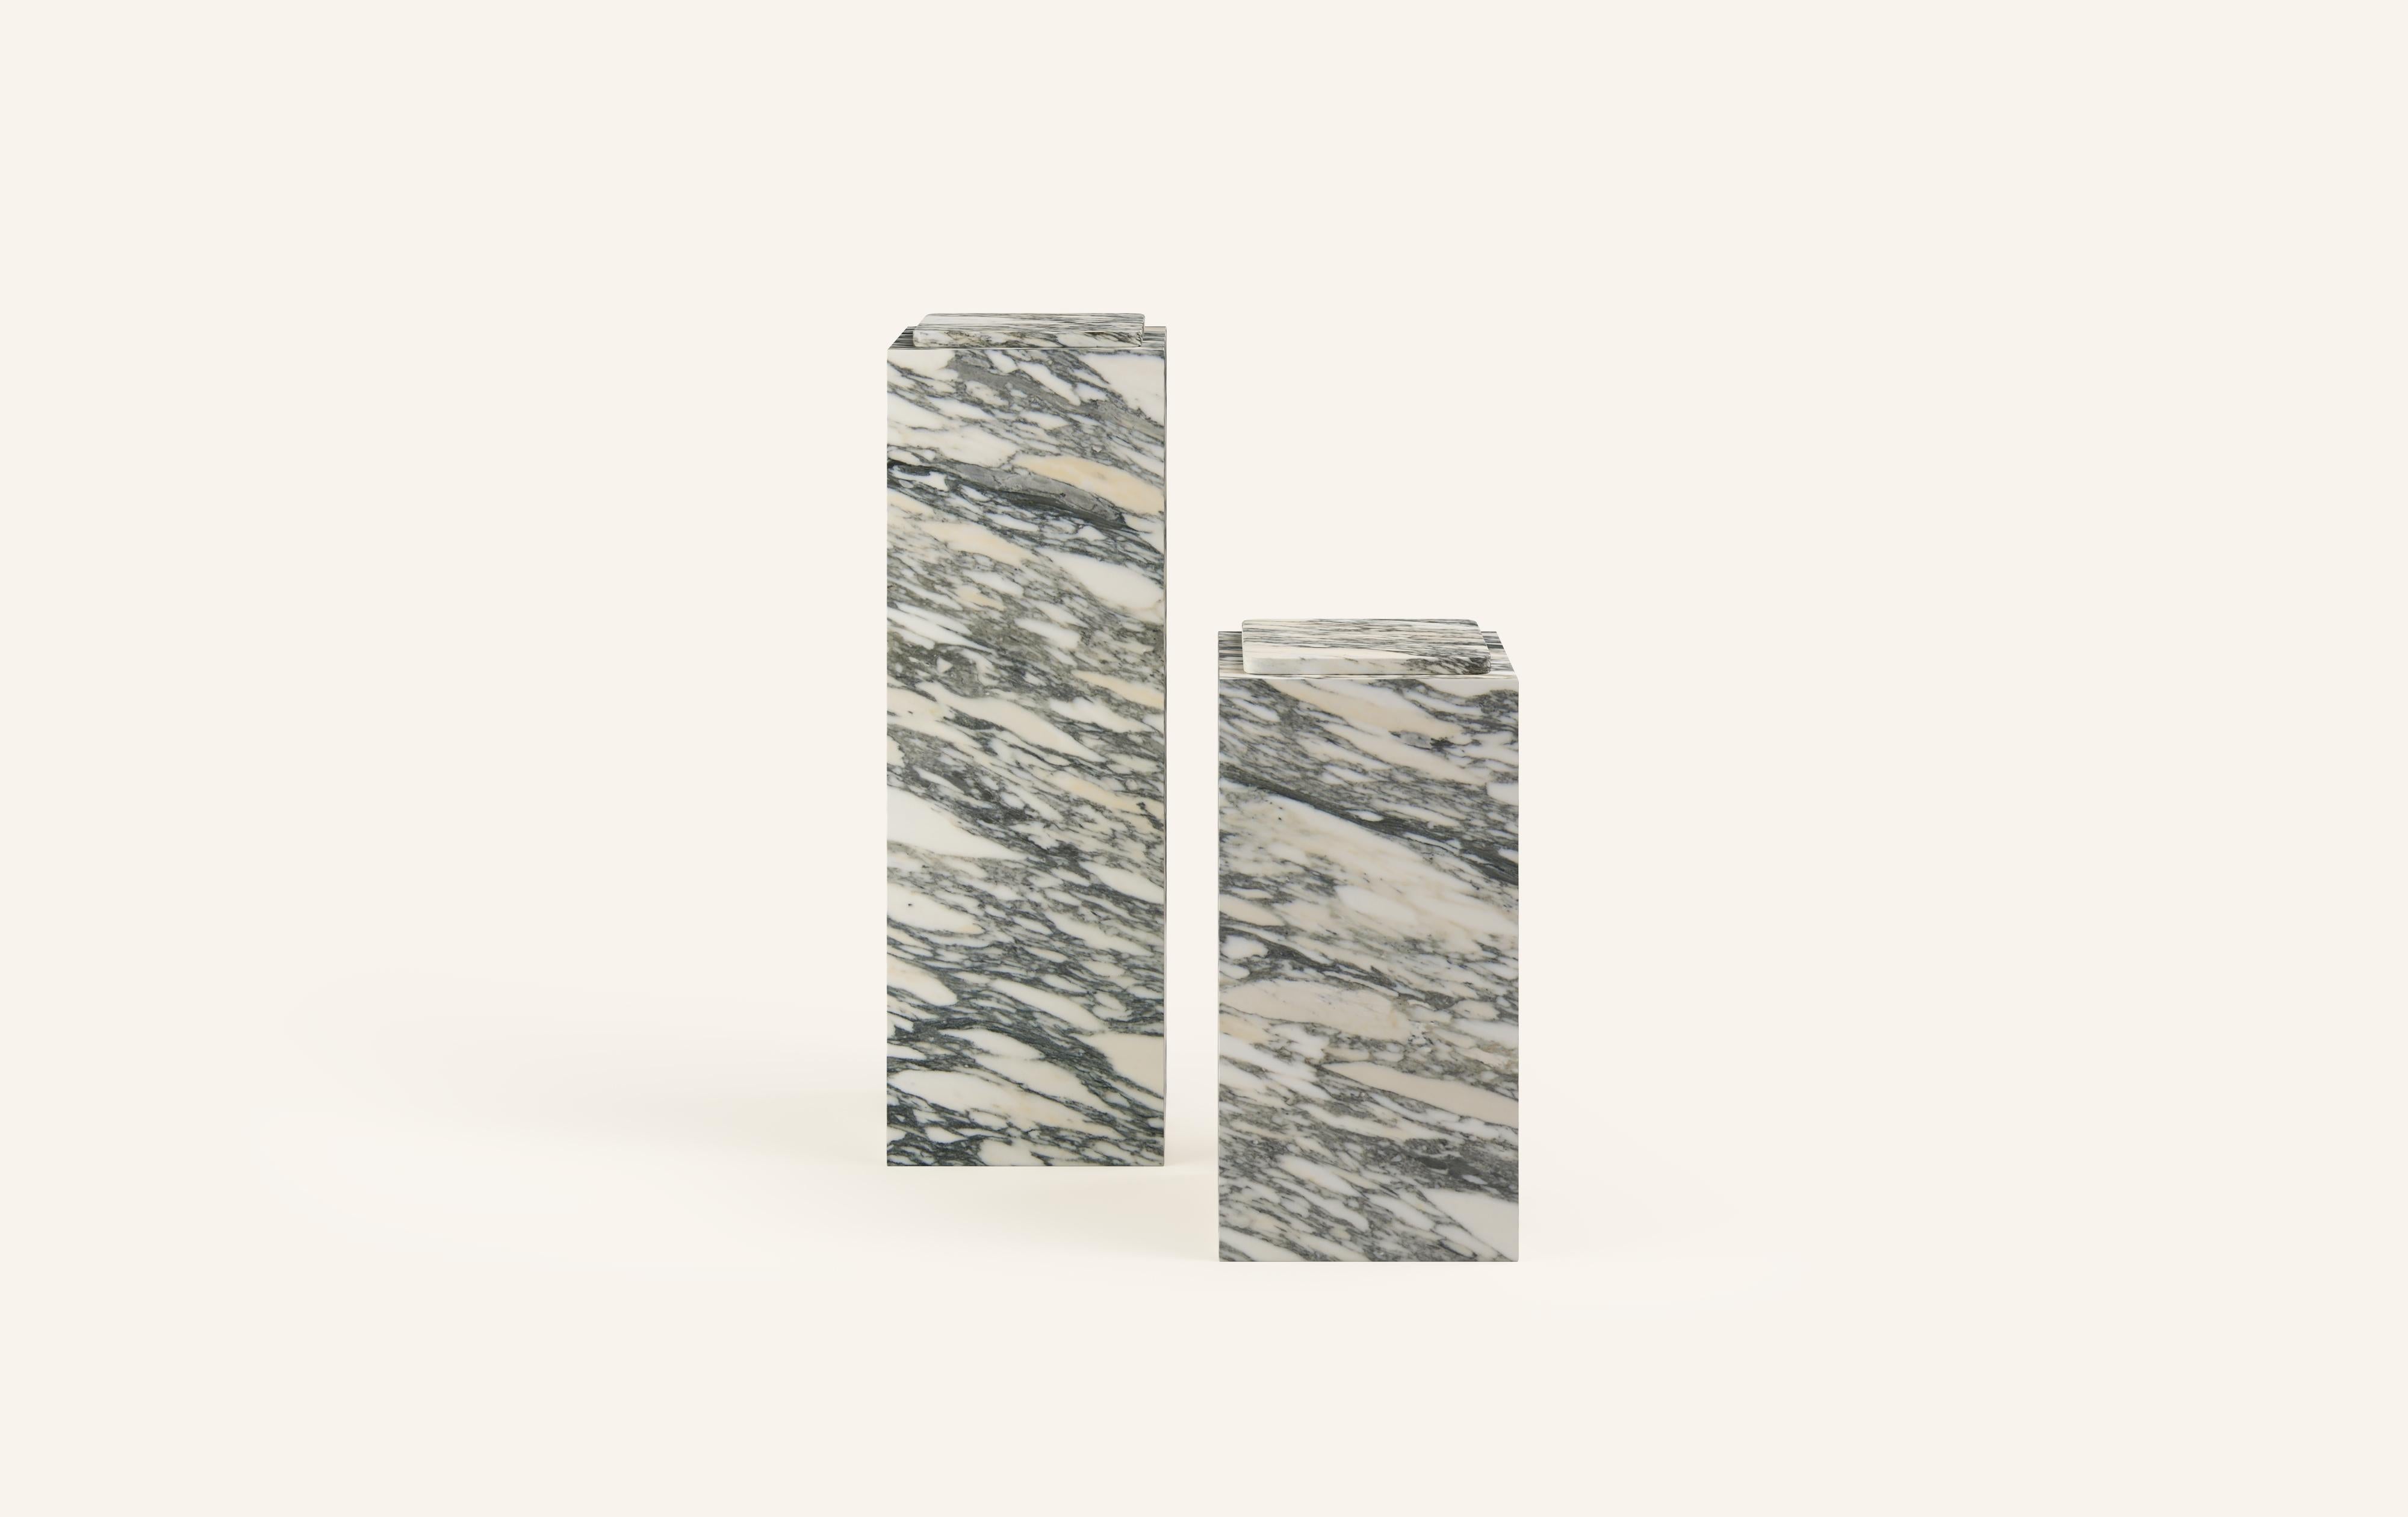 MONOLITHIC FORMS SOFTENED BY GENTLE EDGES. WITH ITS BOLD MARBLE PATTERNS CUBO IS AS VERSATILE AS IT IS STRIKING.

DIMENSIONS (PEDESTALS SOLD INDIVIDUALLY):
12”L x 12”W x 24”H: 
- 3/4